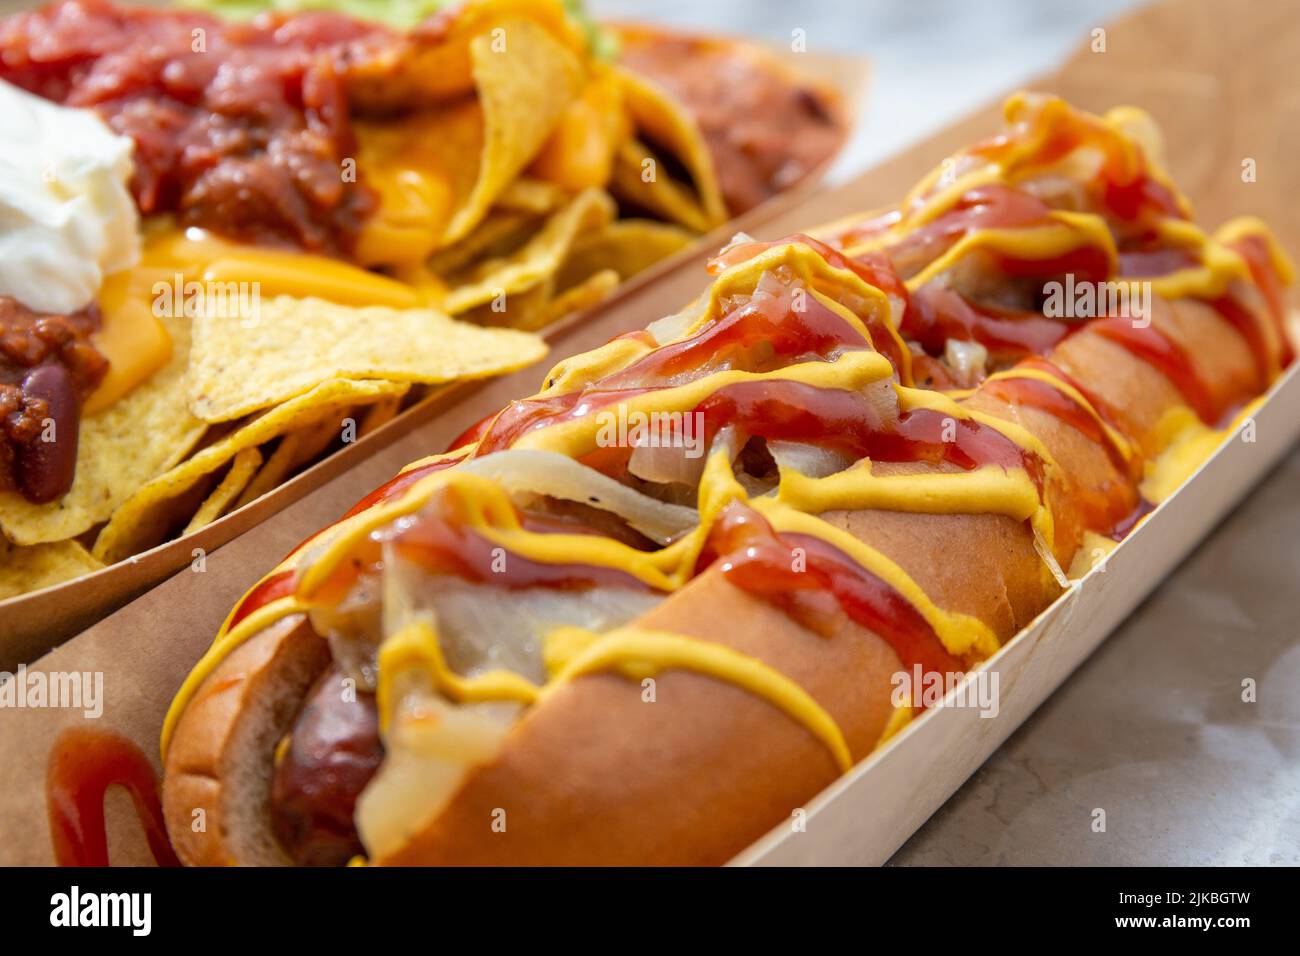 Street food hot dog smothered in ketchup and mustard with chilli nachos serving suggestion. Stock Photo